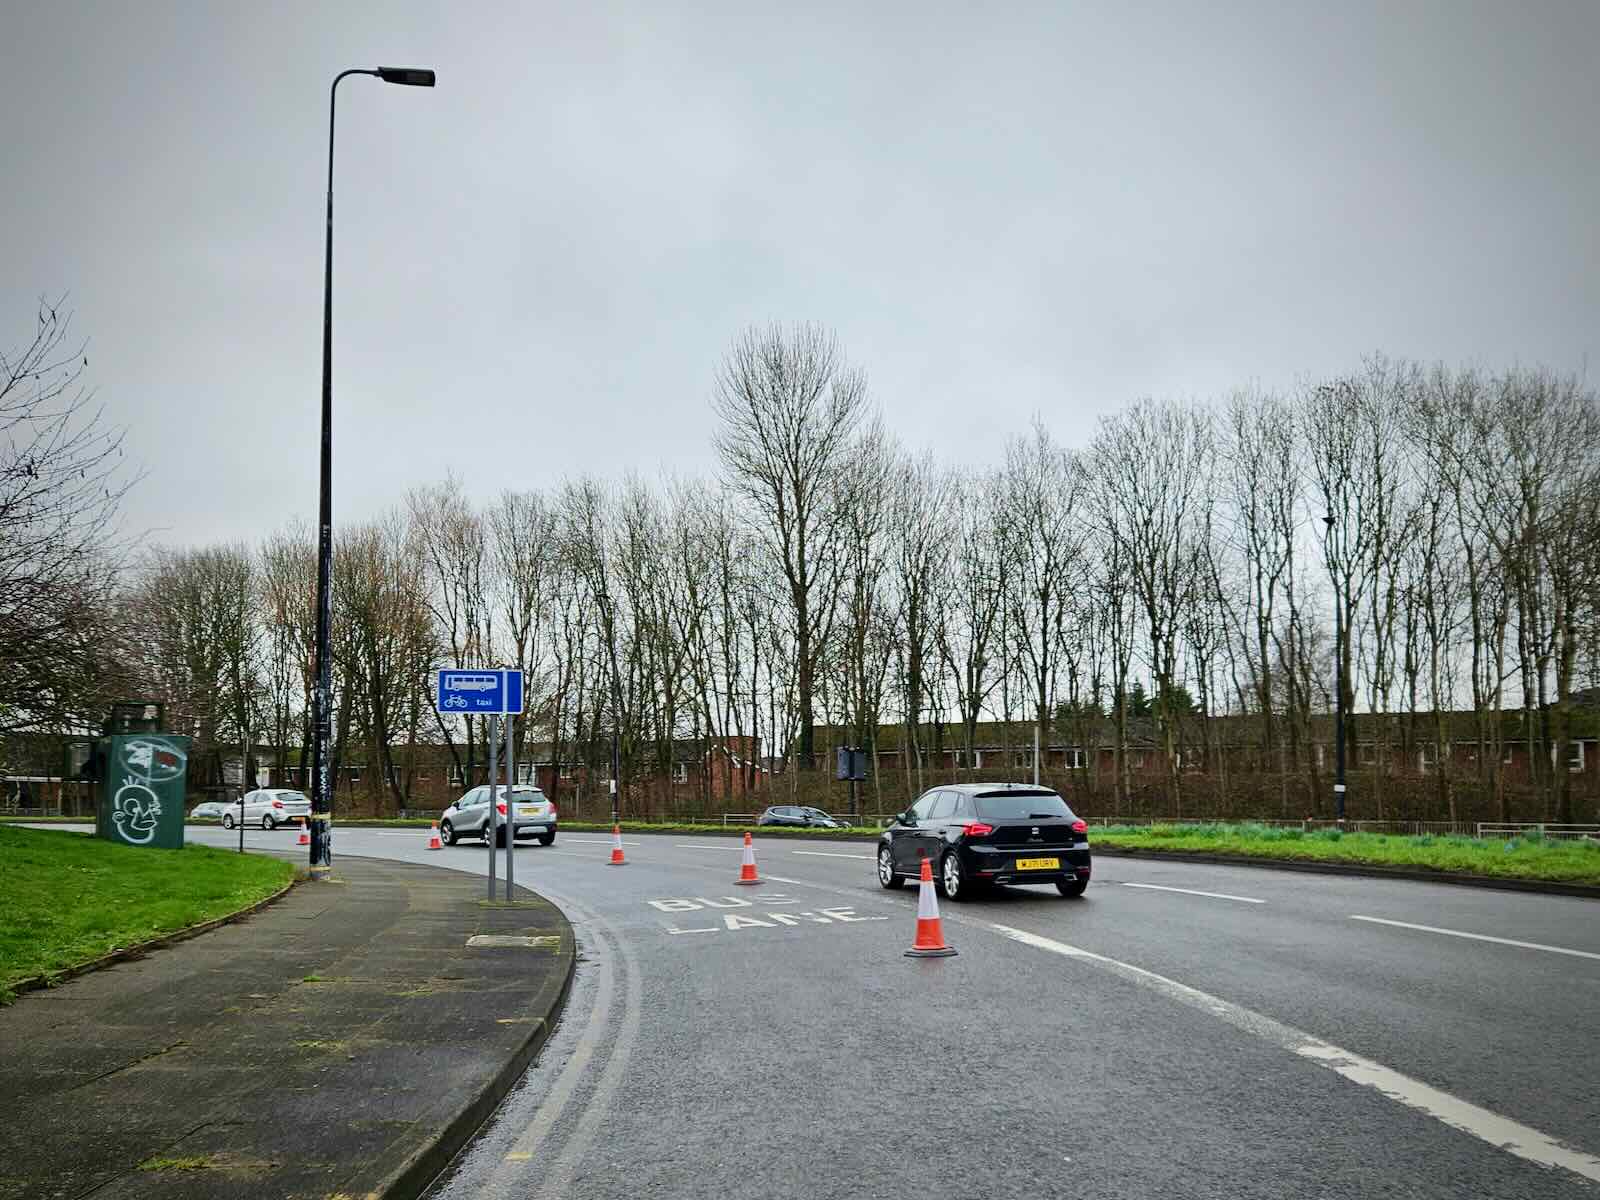 Cones continue after the gyratory